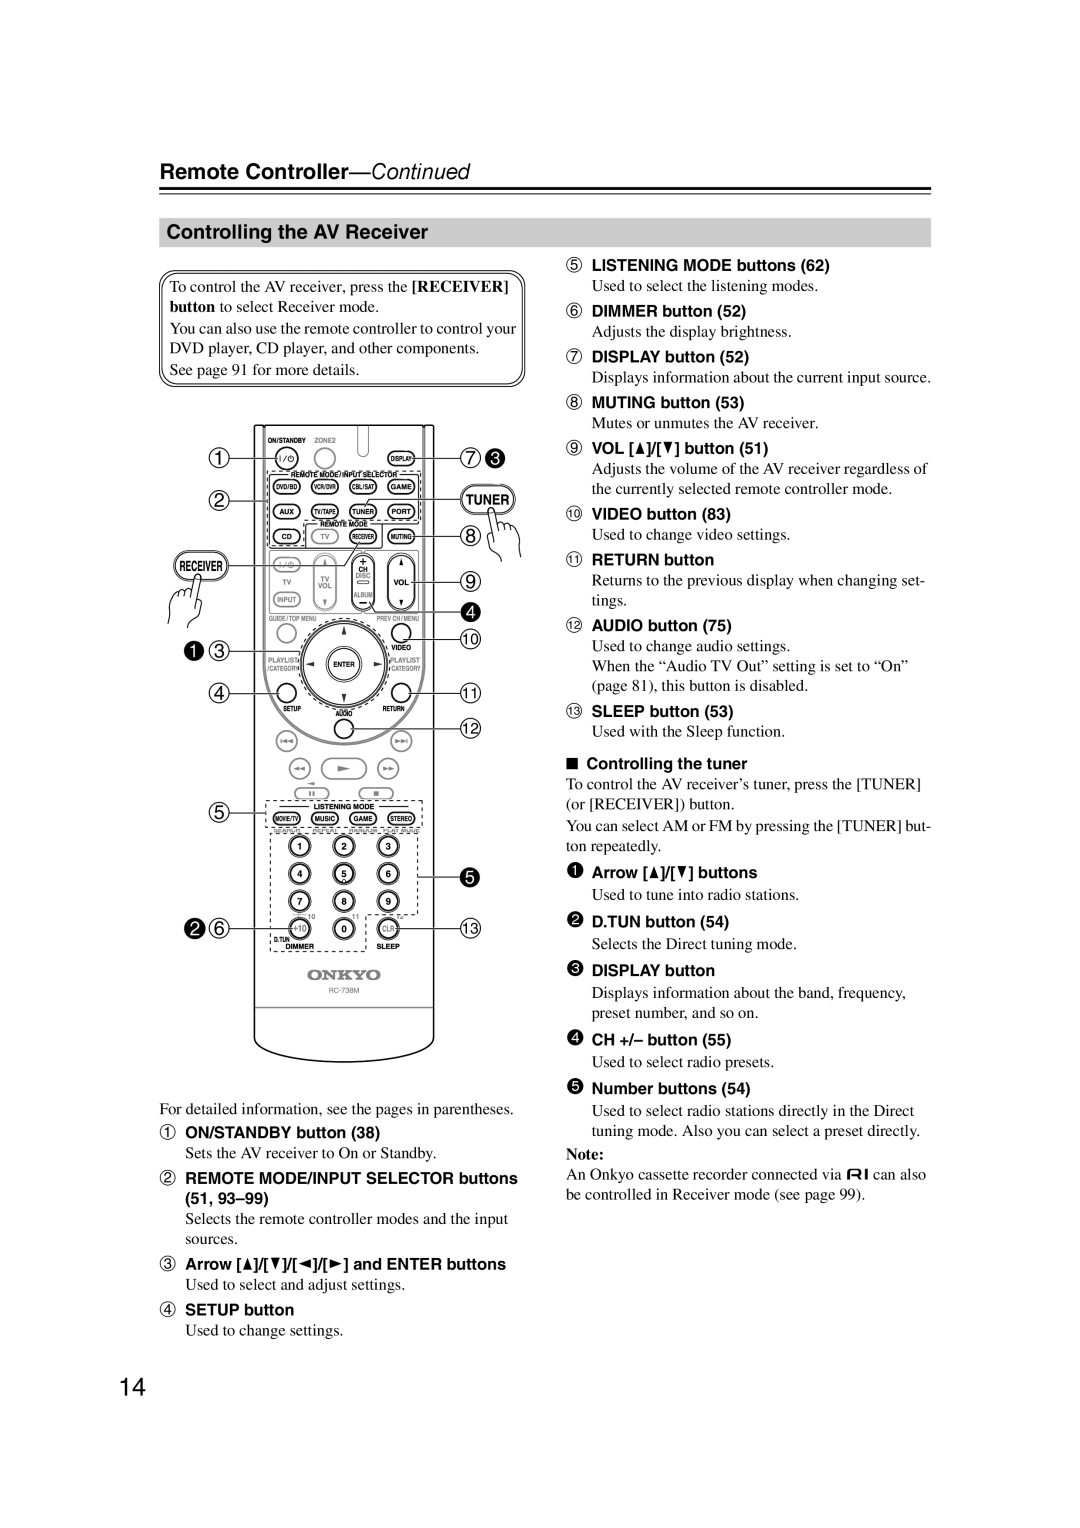 Onkyo SR607 instruction manual Remote Controller—Continued 